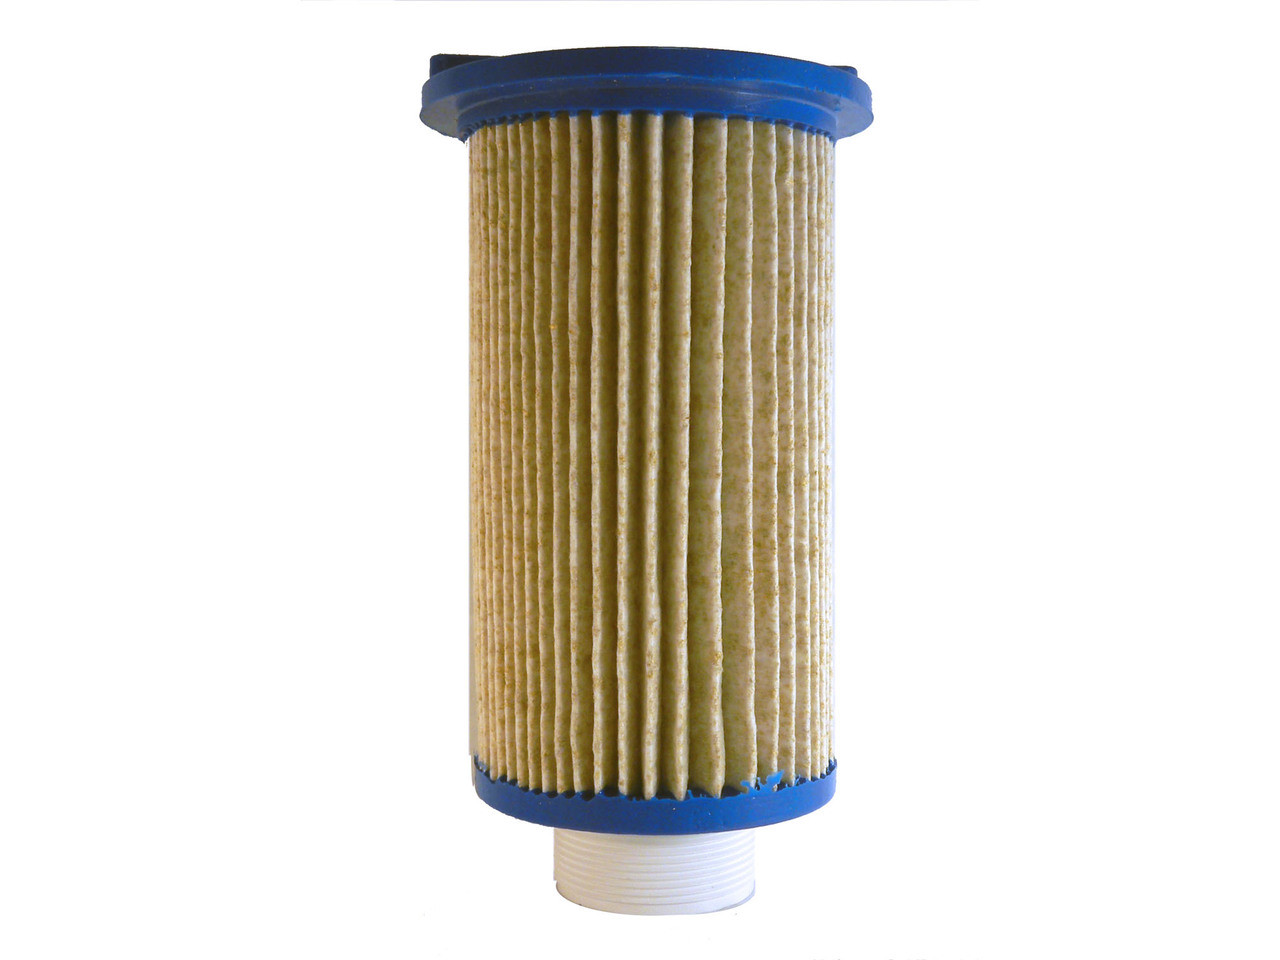 Master Spa - X268511 - PMA-EP2 - Filter Element - Eco Pur Mineral Filter Insert for Twilight Series 